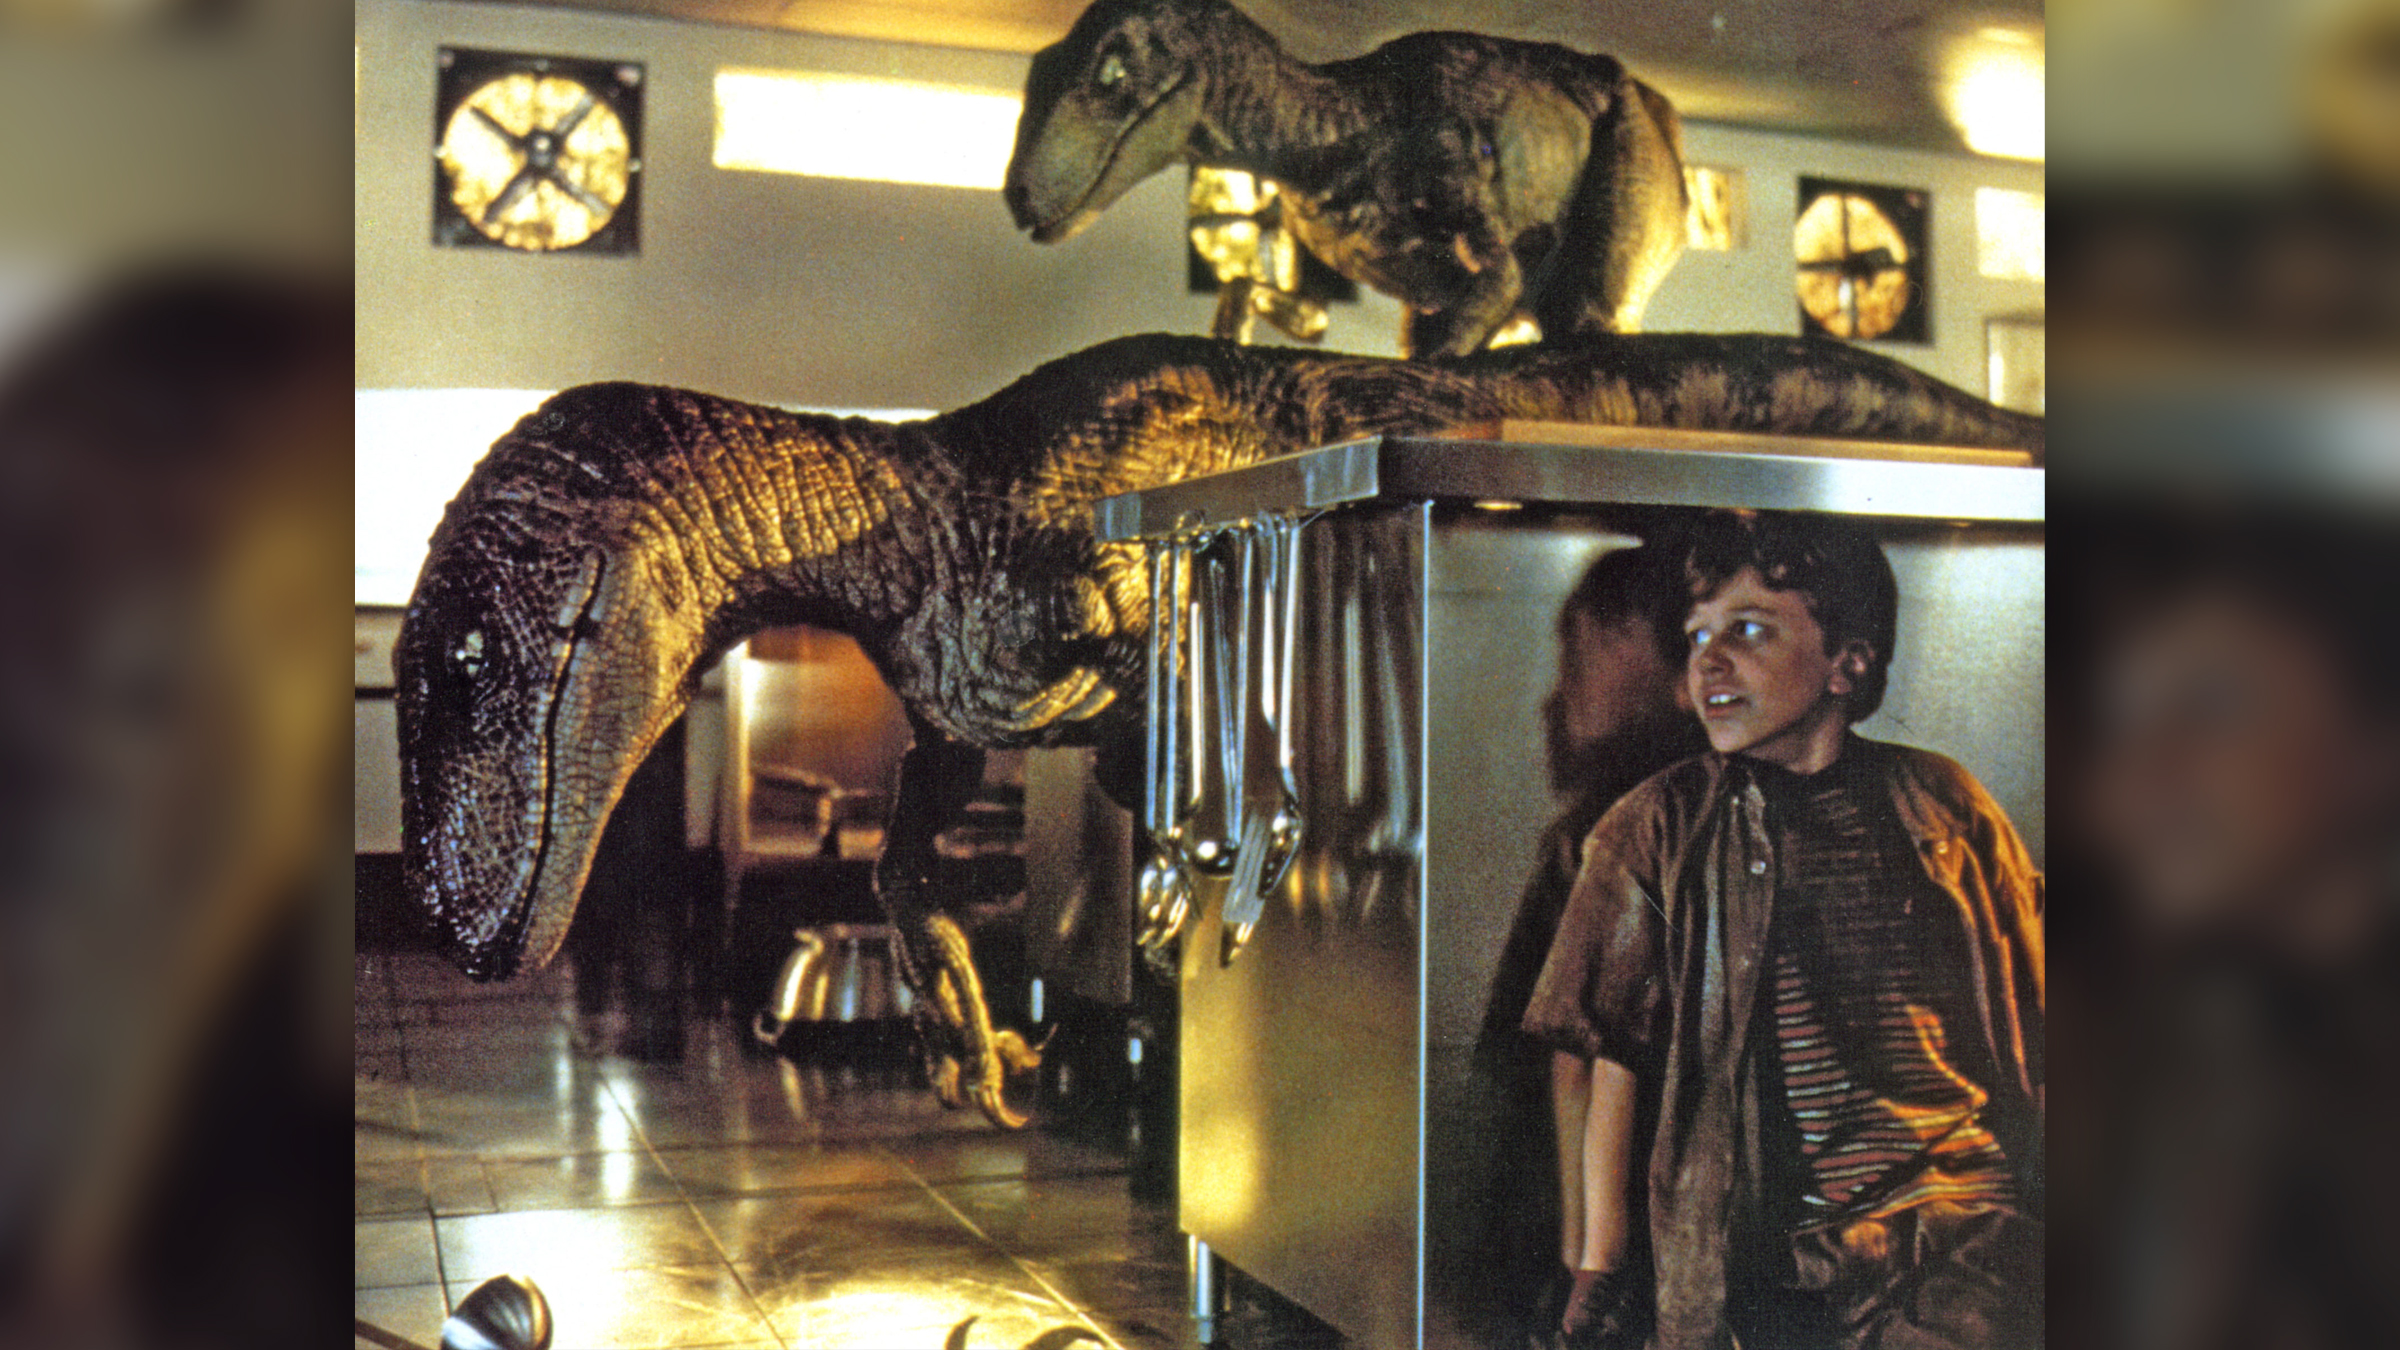 In a scene from the 1993 movie Jurassic Park, a boy hides in the kitchen from two velociraptor dinosaurs.